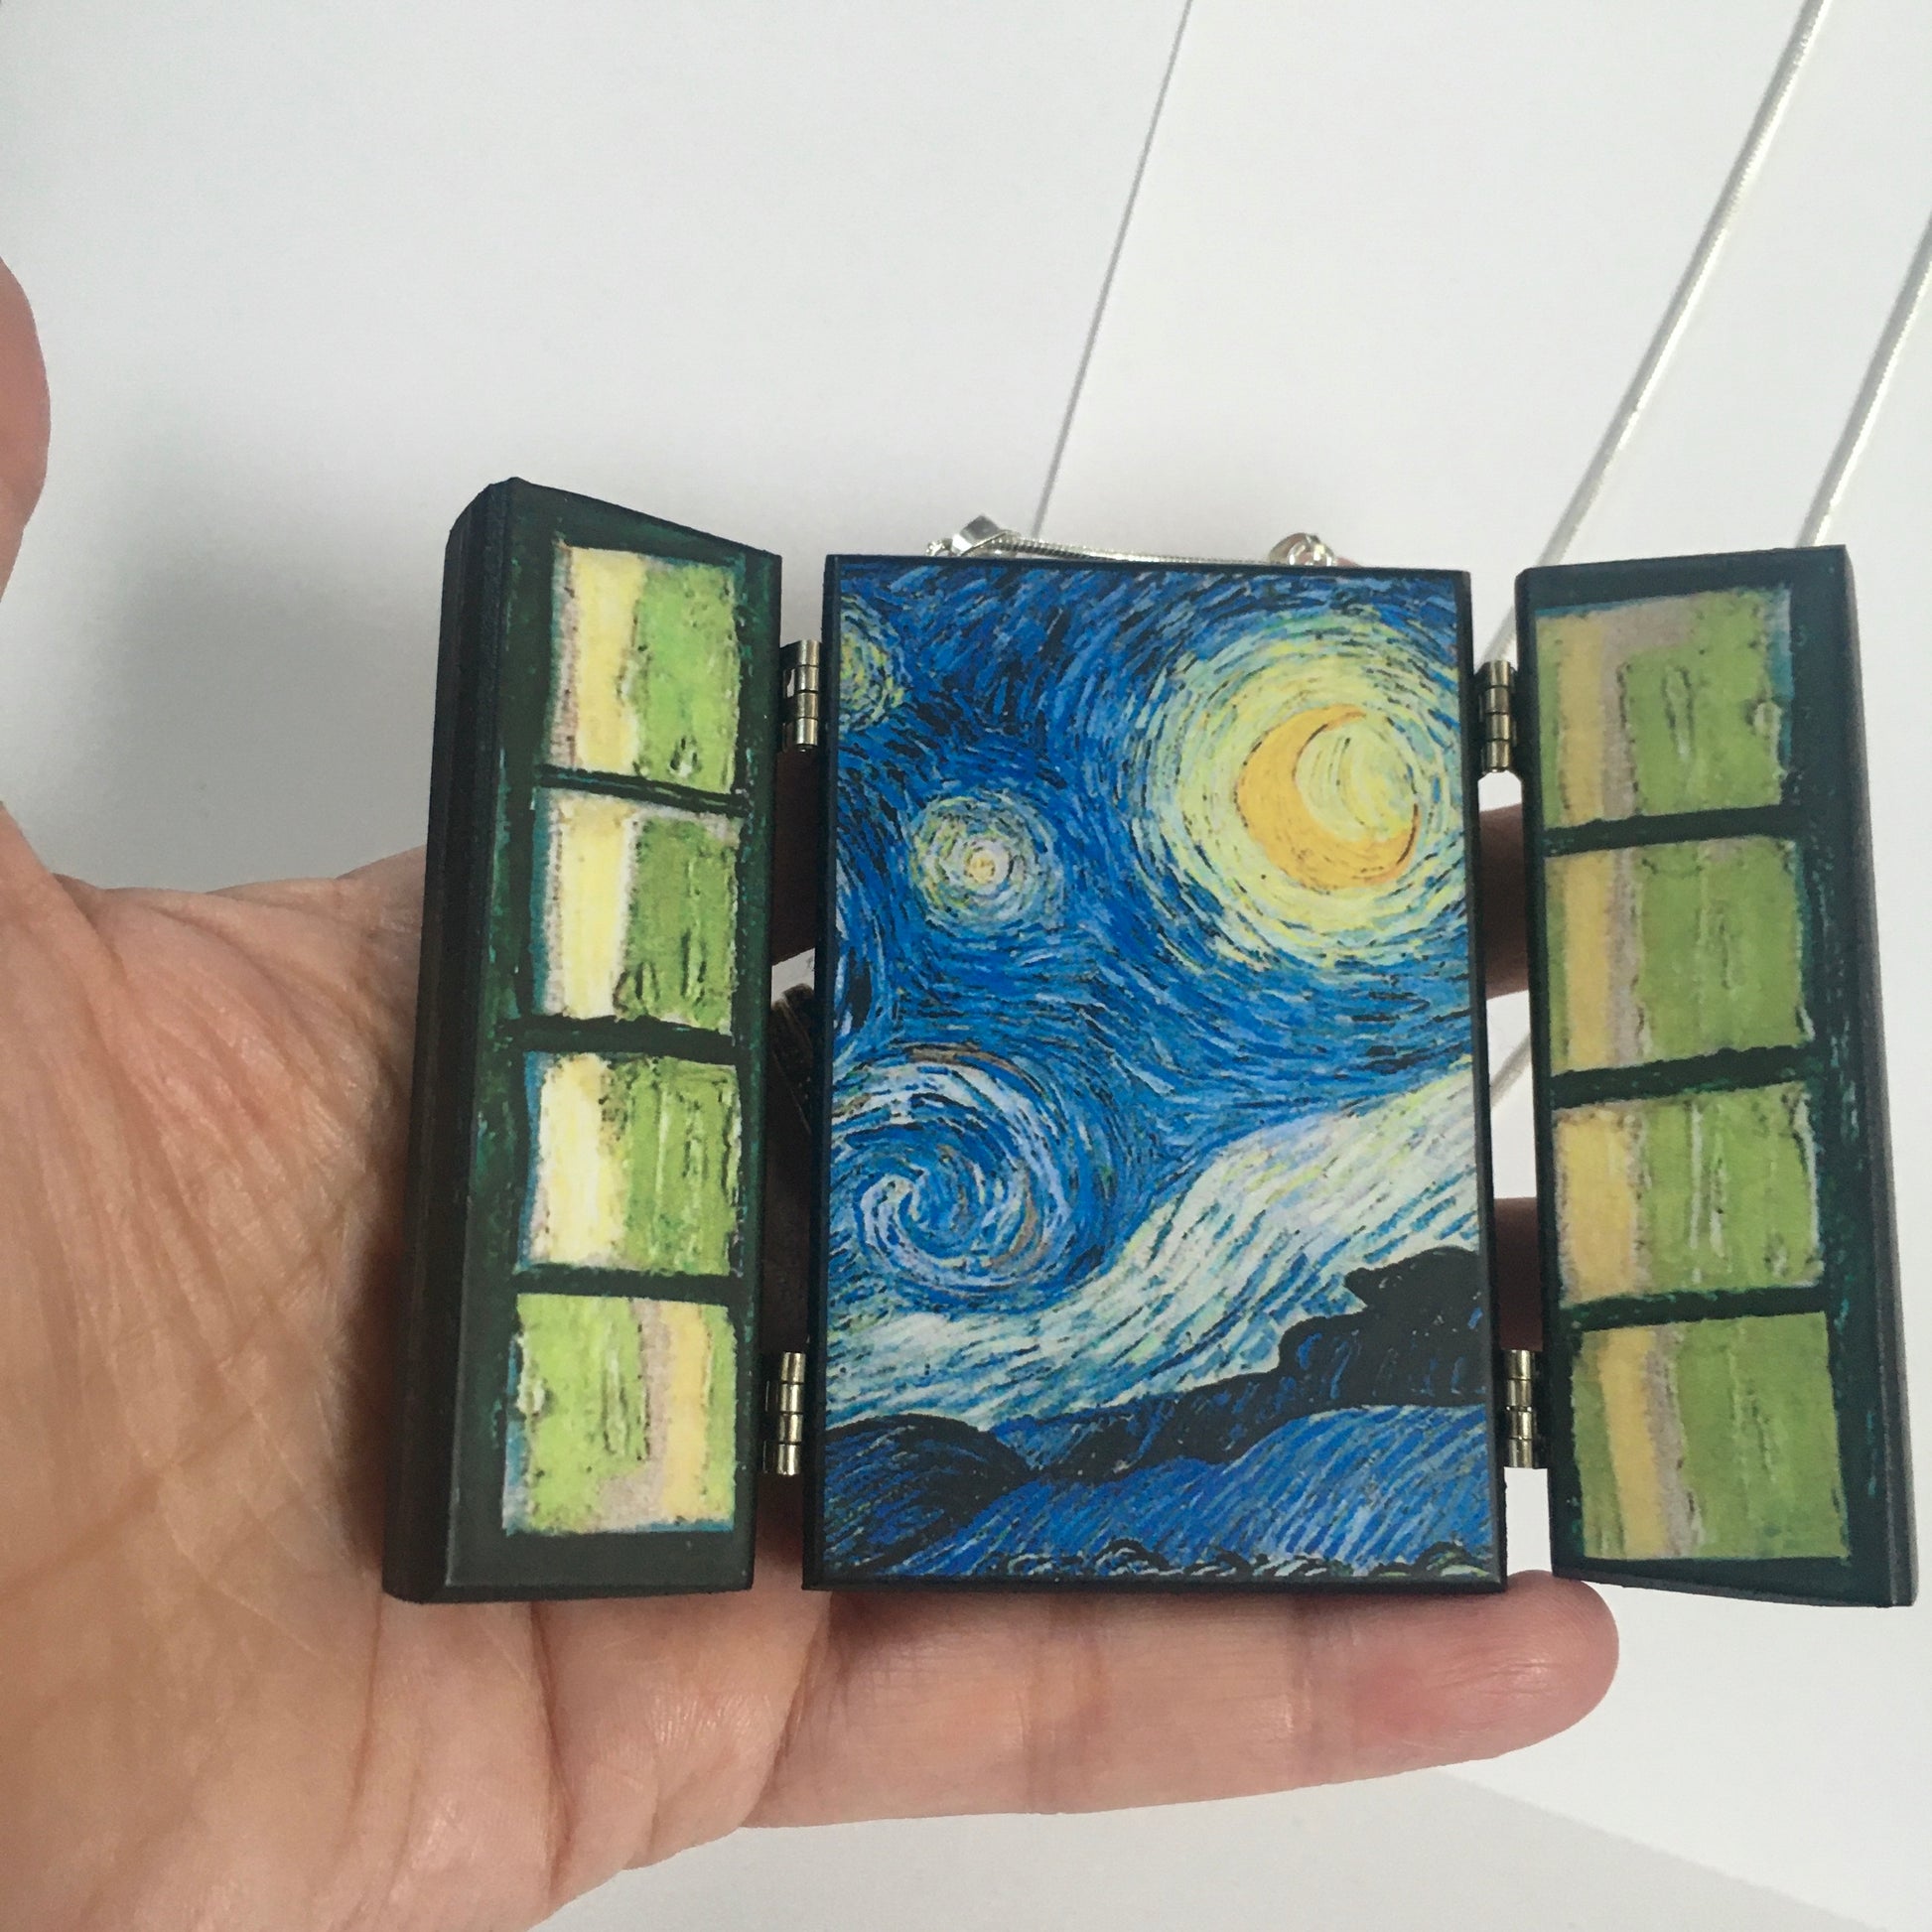 Fully functional, this statement pendant is made up of two doors inspired by the window from the post-impressionist painting "Bedroom at Arles", opening these two doors we find a detail of another famous painting by the artist Vincent Van Gogh: "Starry Night ".